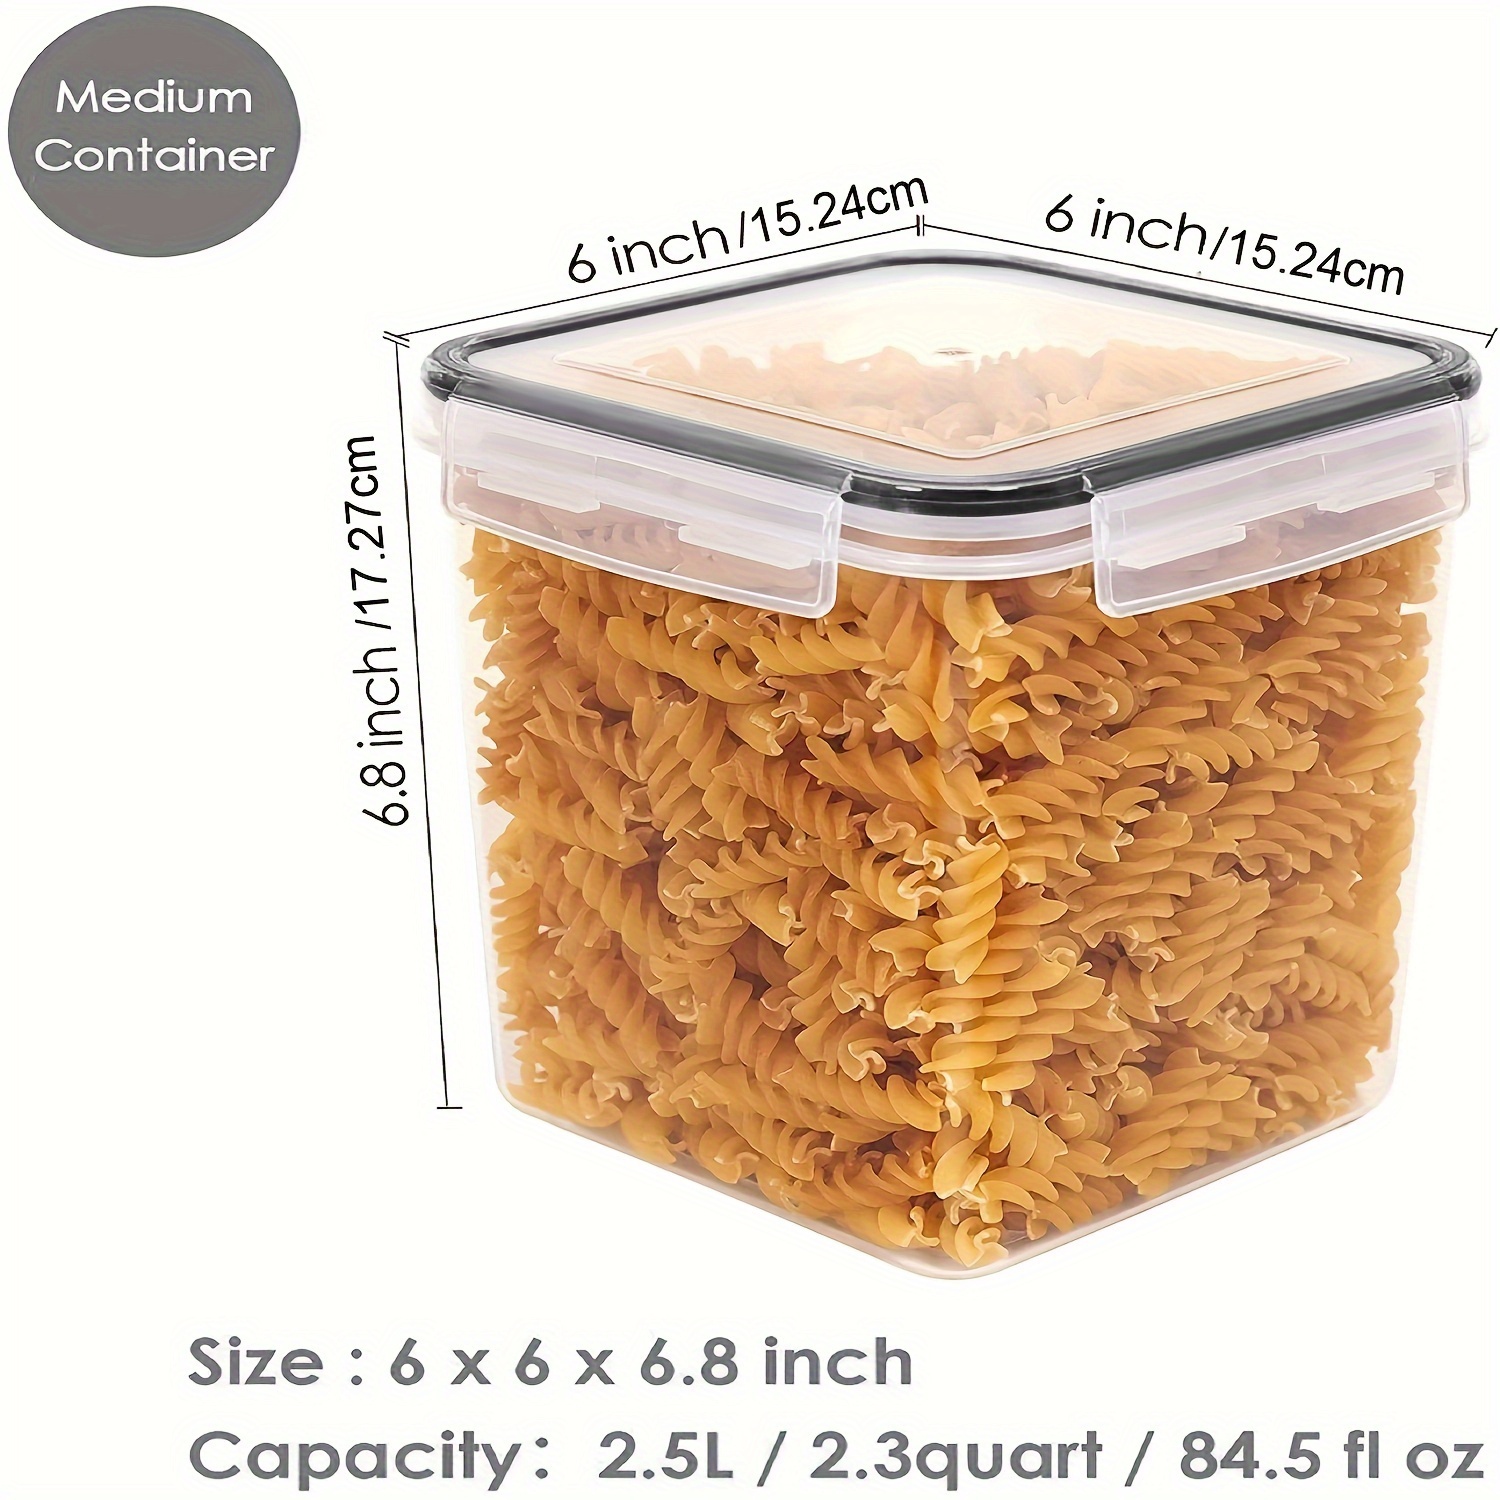 Airtight Food Storage Containers Set for Home Organization - 7